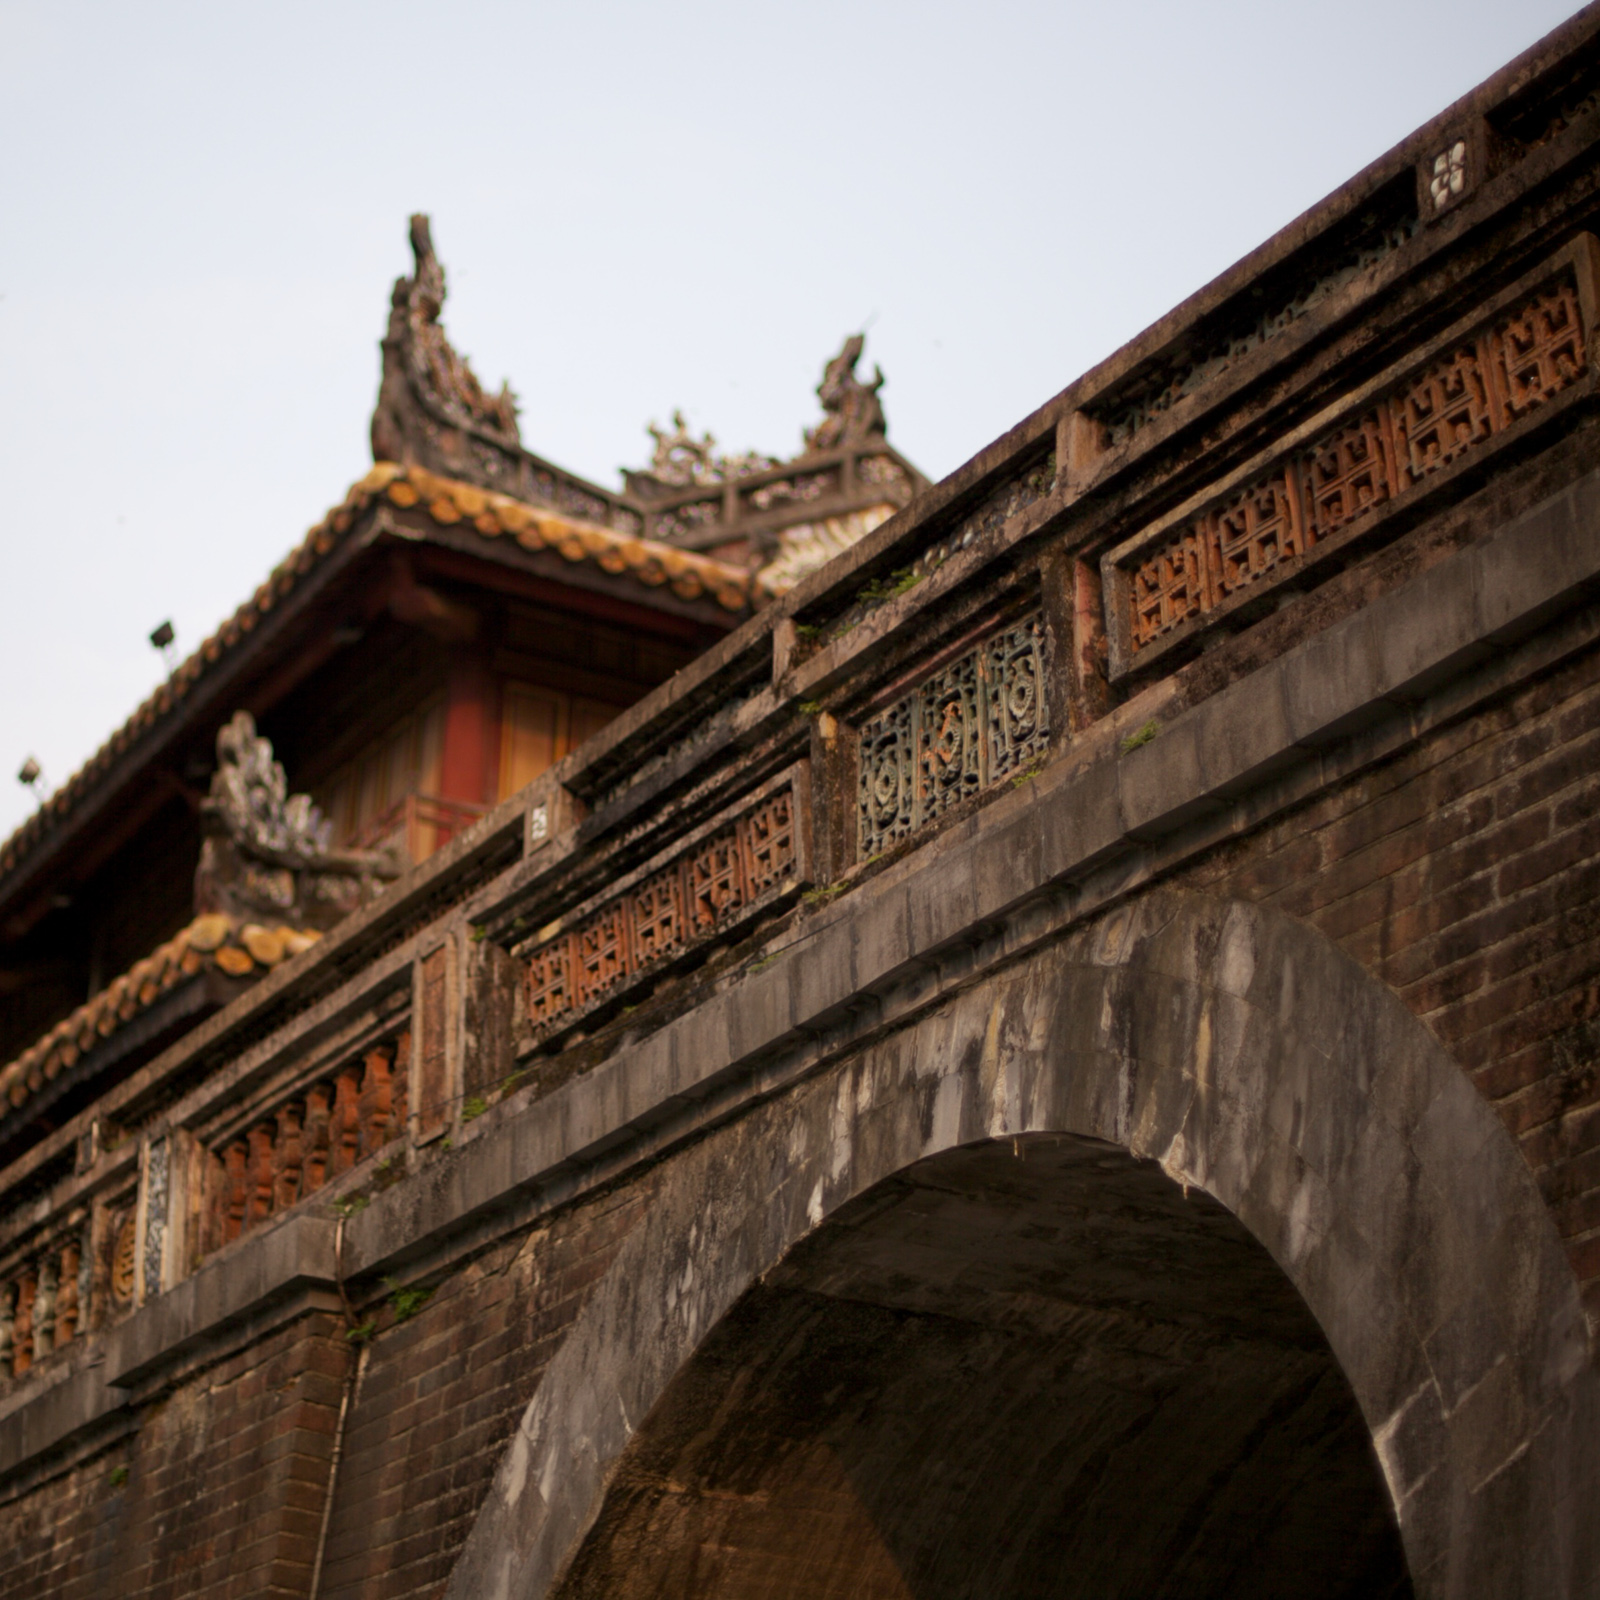 Imperial Palace, Hue